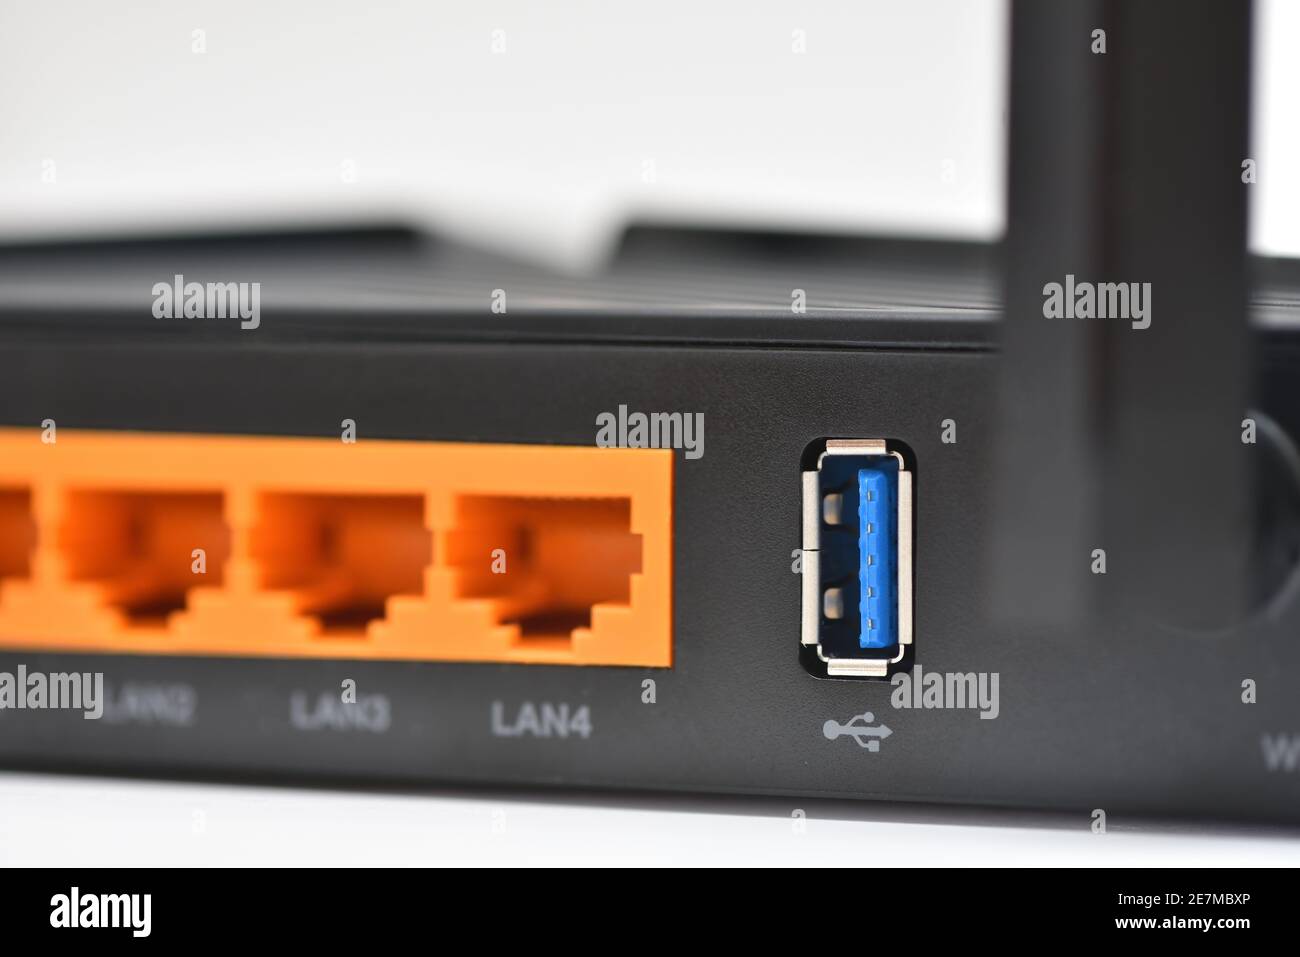 Usb 3.0 port for a flash card or disk on a modern wi-fi router Stock Photo  - Alamy